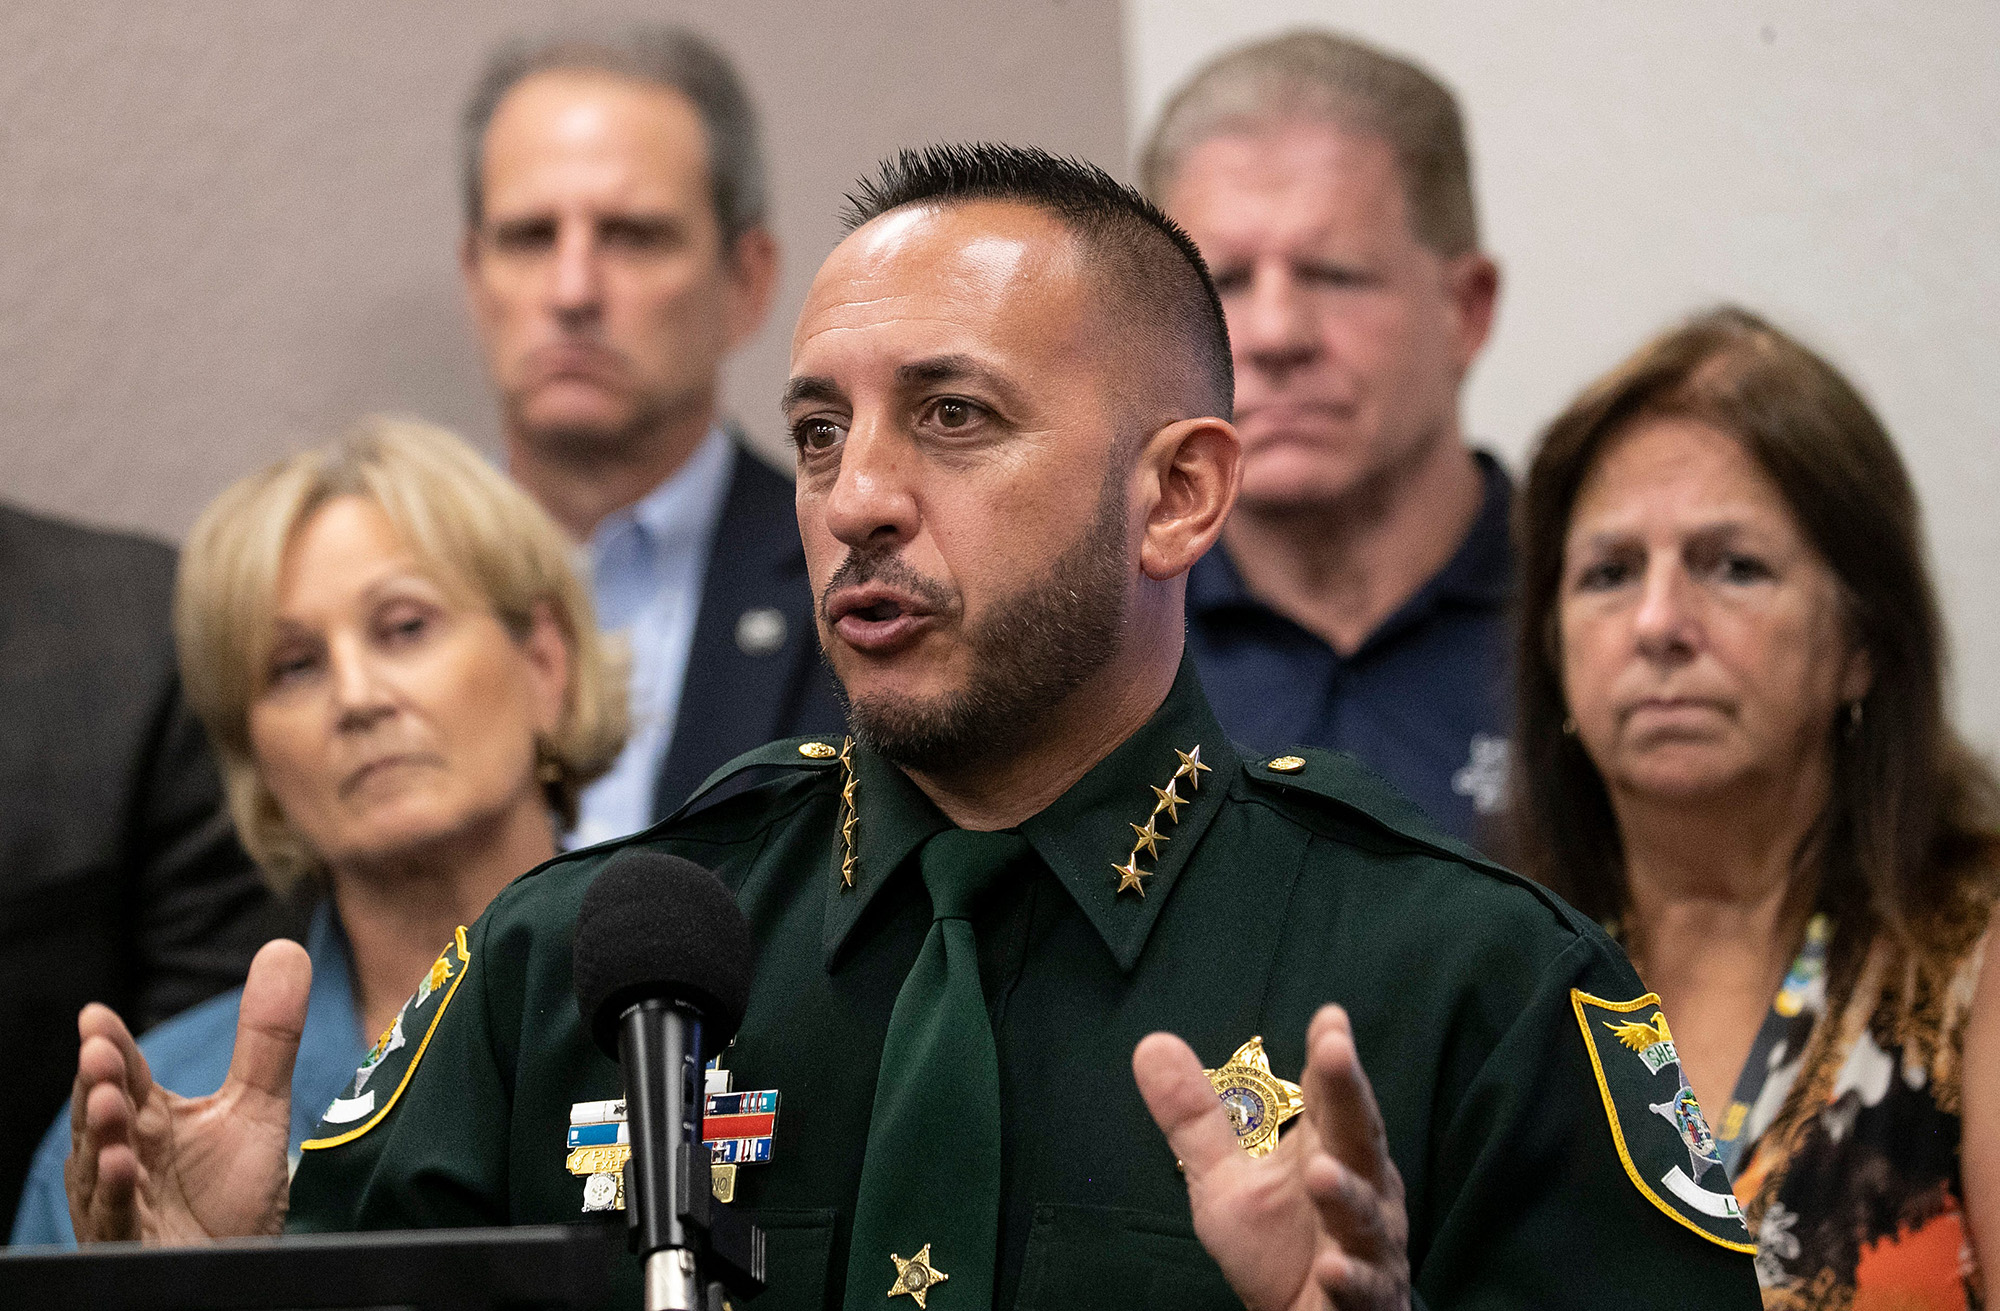 Lee County Sheriff Carmine Marceno speaks during a press conference about Hurricane Ian preparations on Monday, Sept 26.